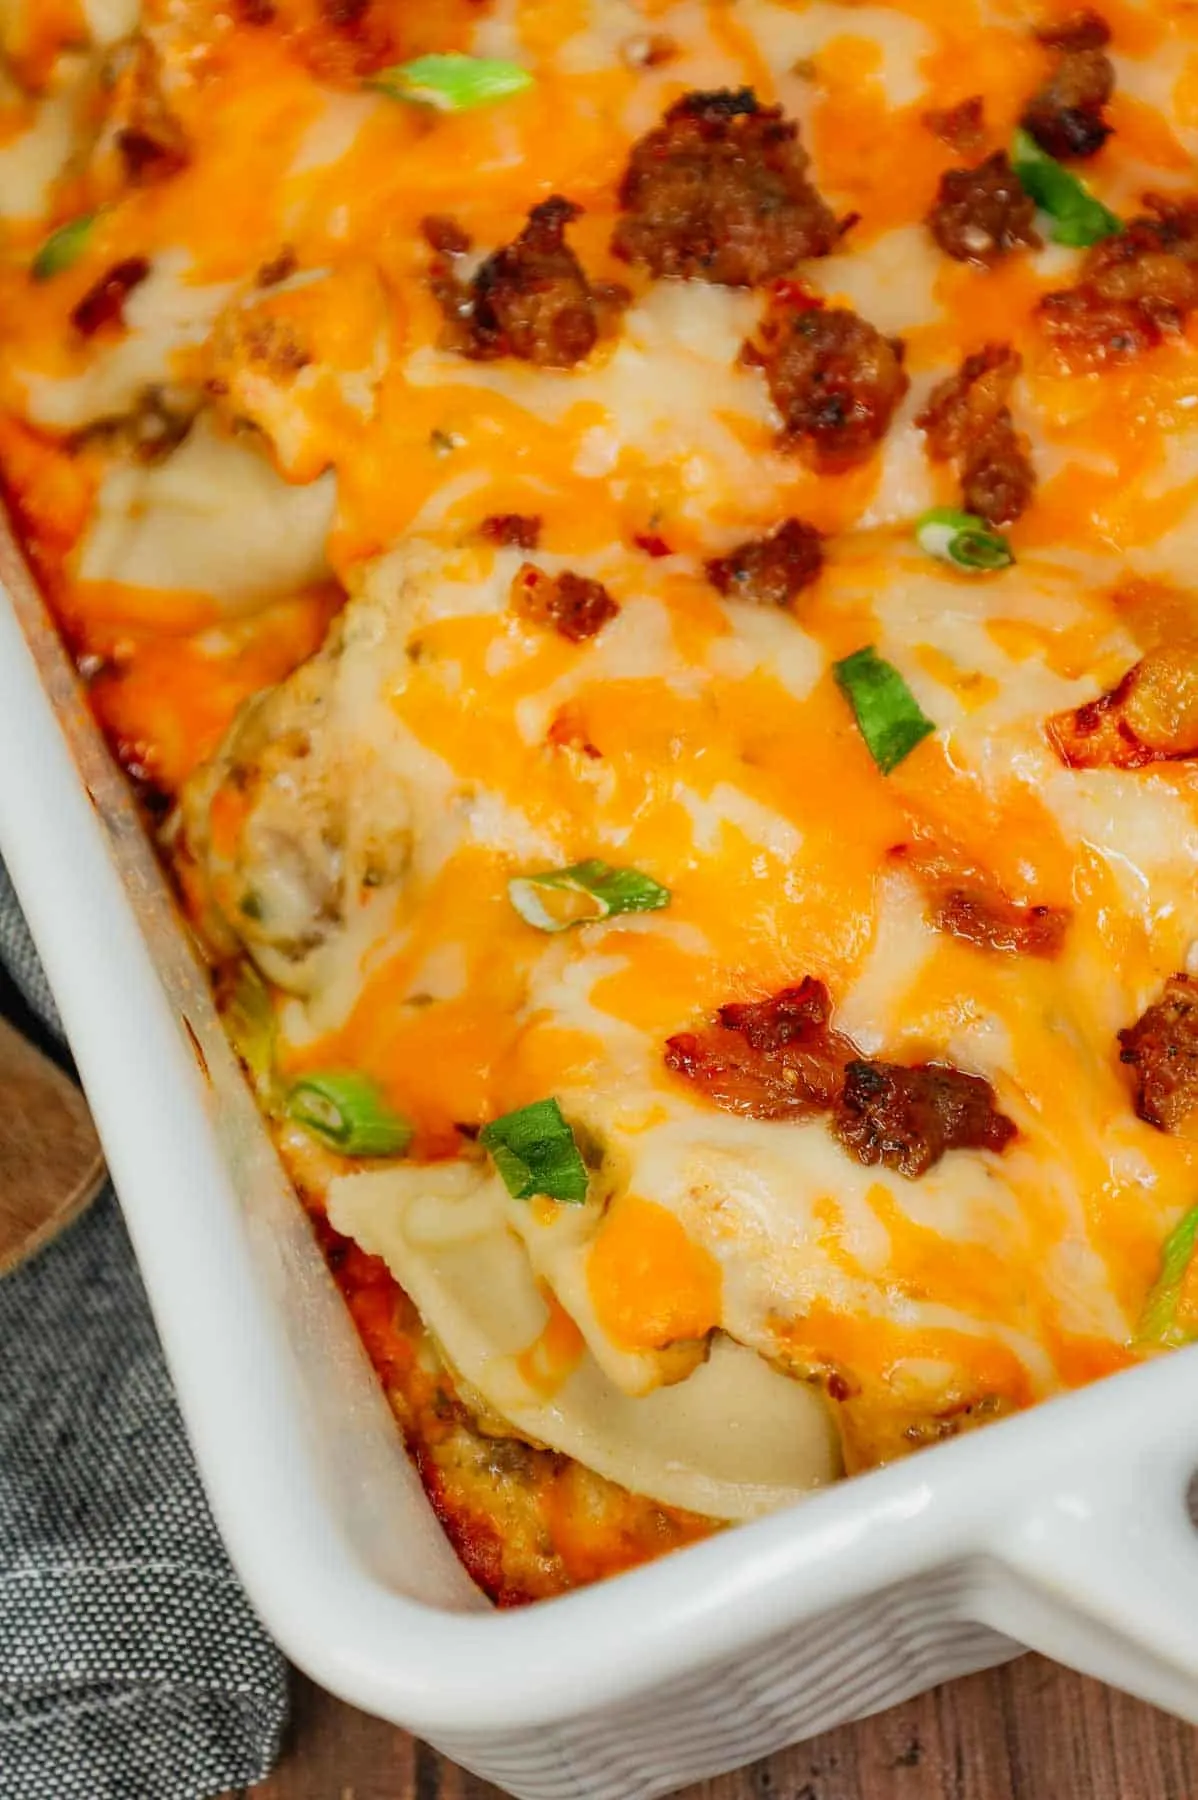 Pierogi Casserole is a hearty dinner recipe loaded with crumbled Italian sausage, onions, three cheese pierogies, cream cheese, Alfredo sauce, shredded mozzarella and cheddar cheese.